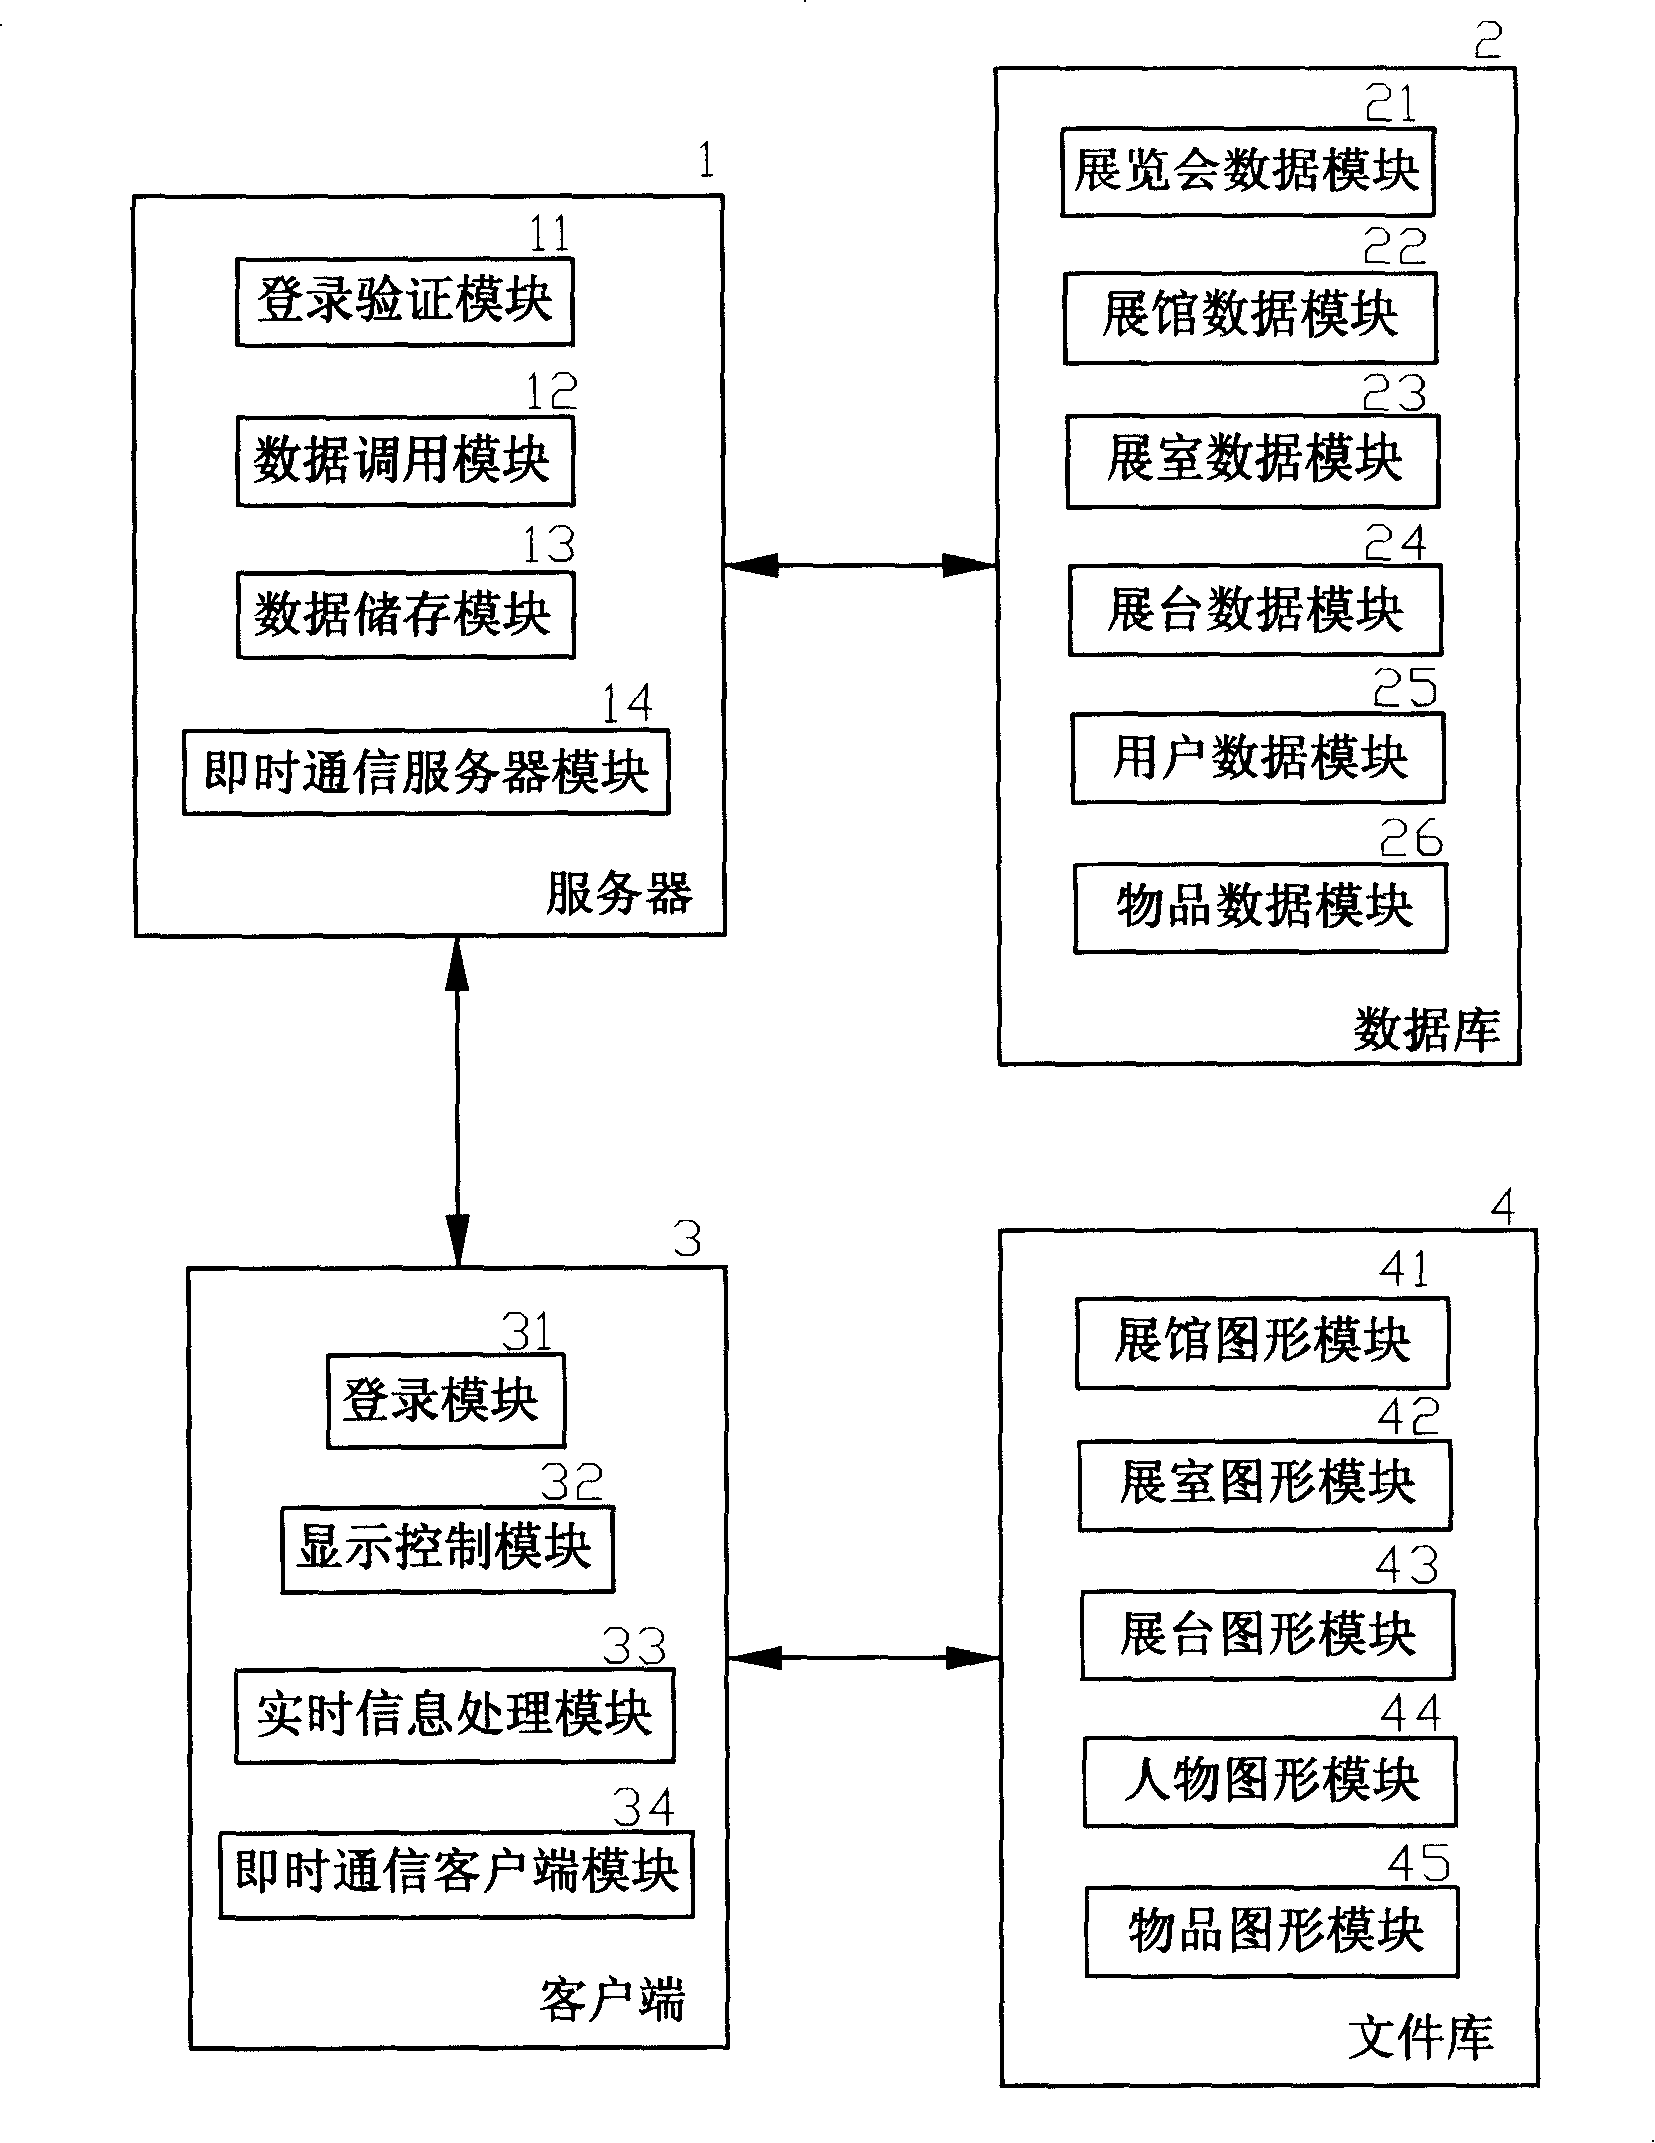 Network virtual exhibition method and system